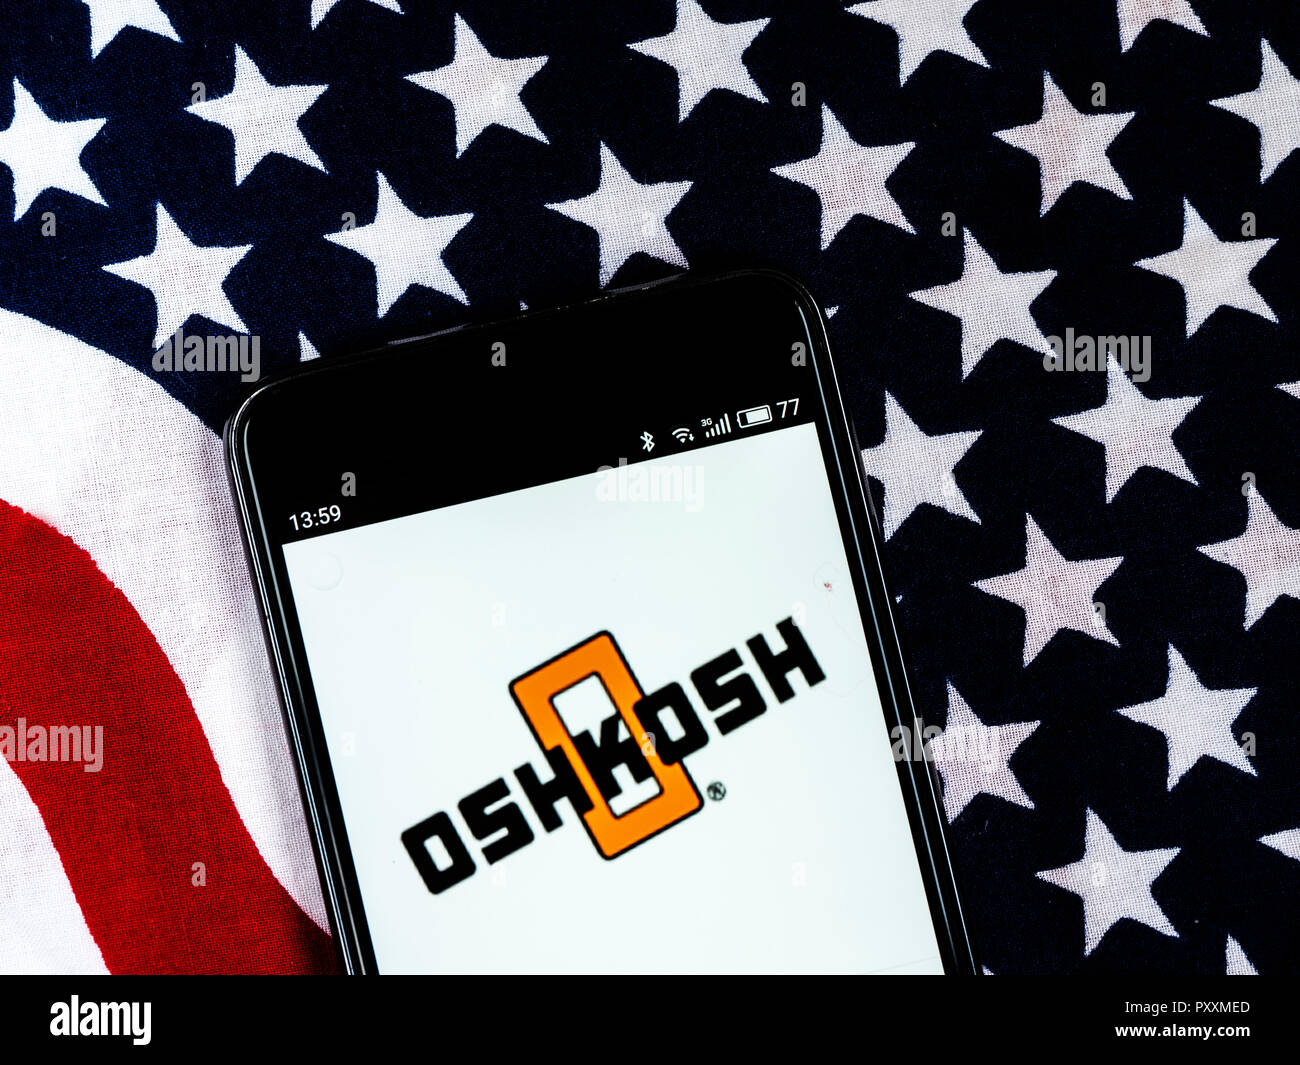 Oshkosh Corporation Defense industry company logo seen displayed on smart phone. Oshkosh Corporation, formerly Oshkosh Truck, is an American industrial company that designs and builds specialty trucks, military vehicles, truck bodies, airport fire apparatus and access equipment. Stock Photo